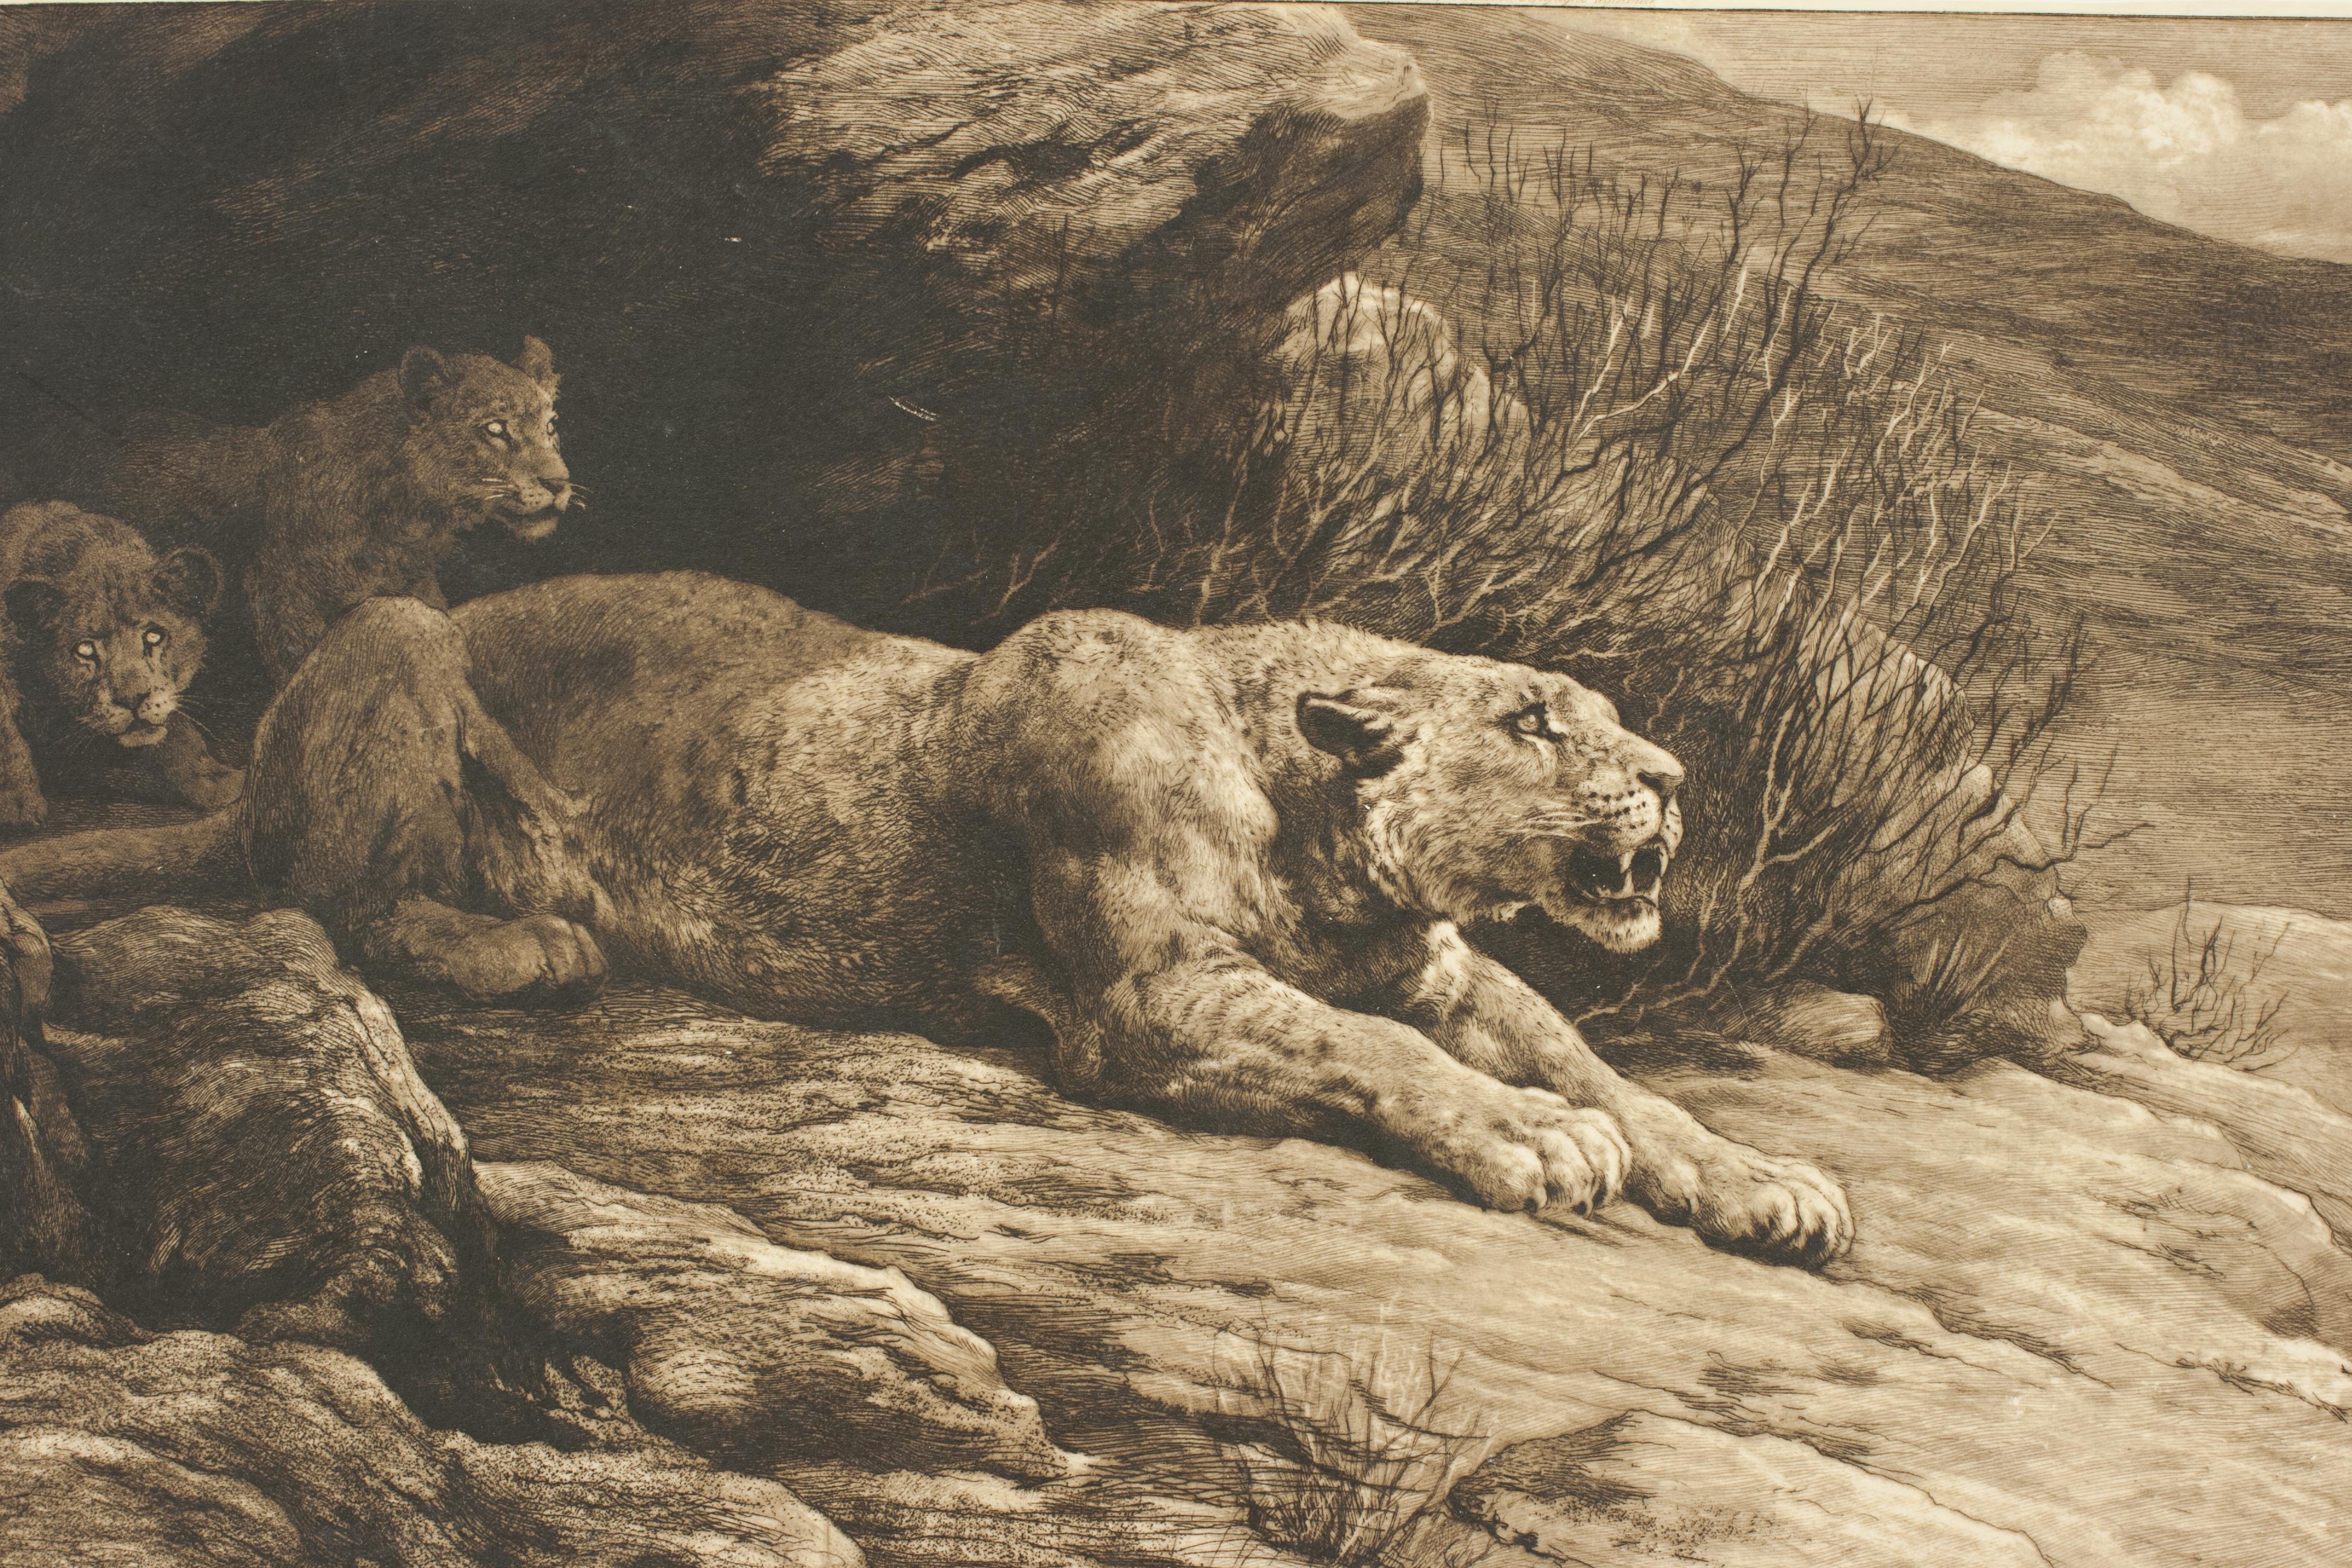 Sporting Art Mountain Lion and Cubs by Herbert Dicksee, Antique Etching